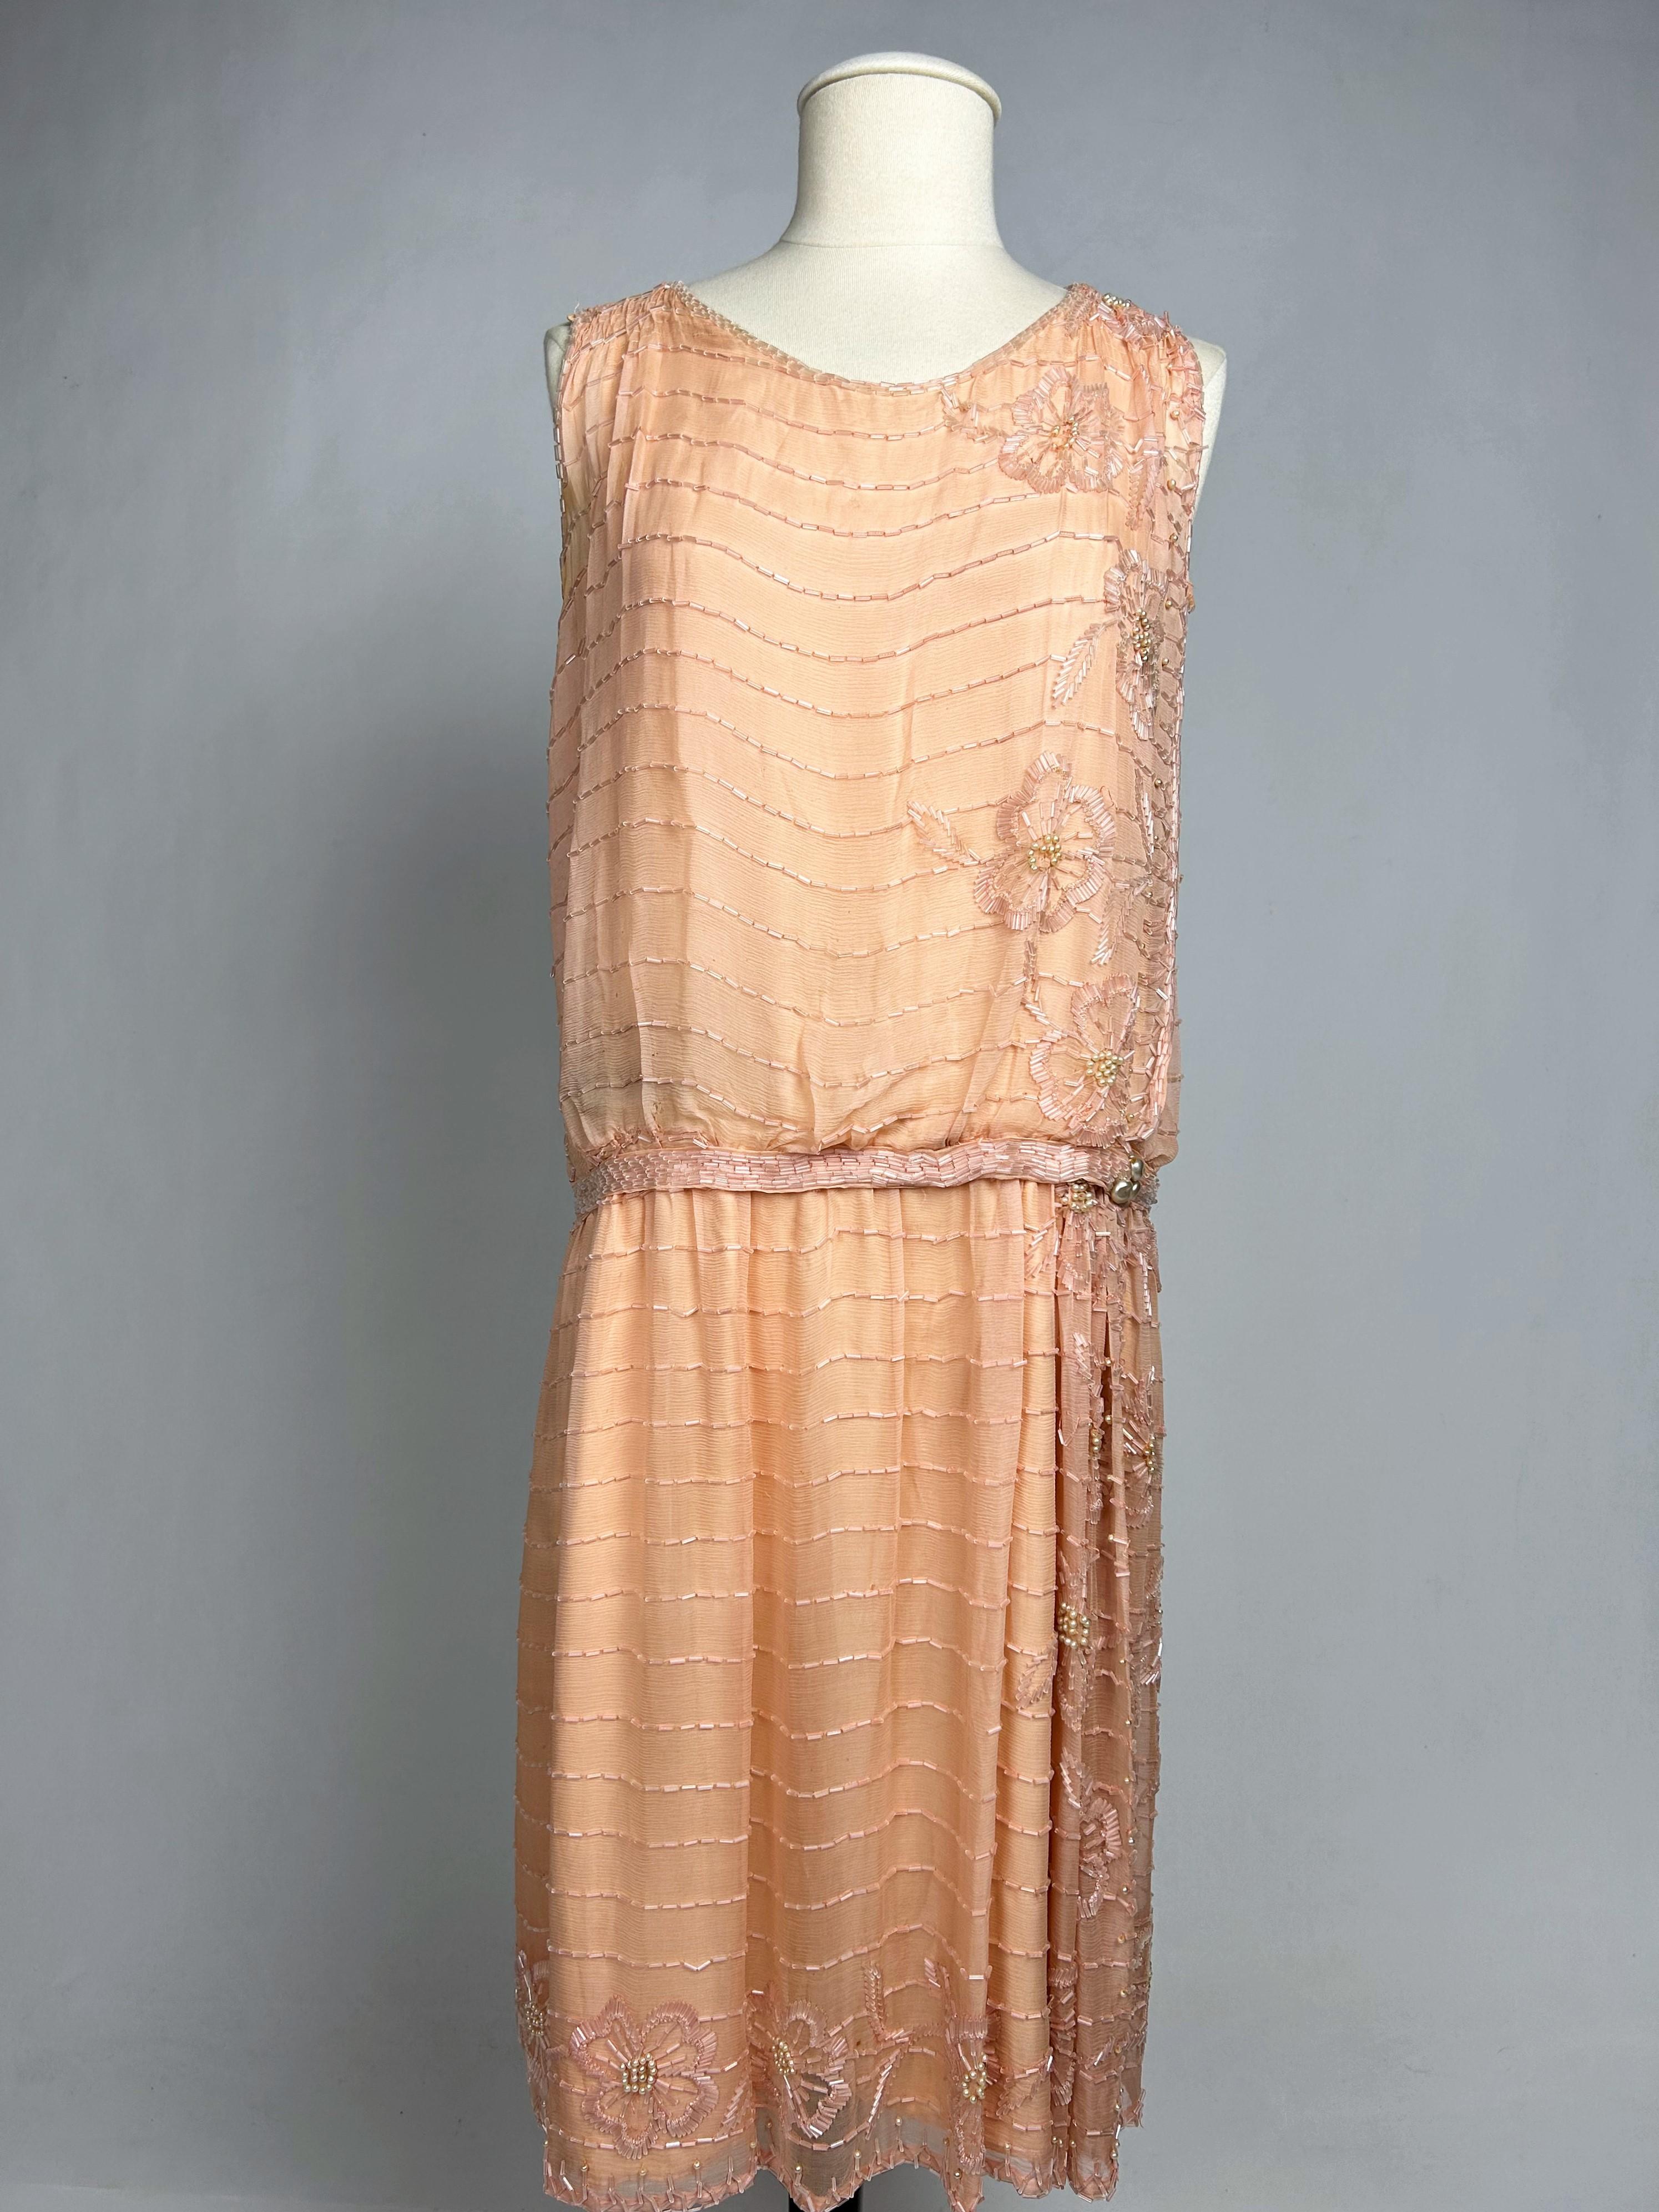 A Salmon embroidered Chiffon Flapper Dress - France Circa 1925 For Sale 2